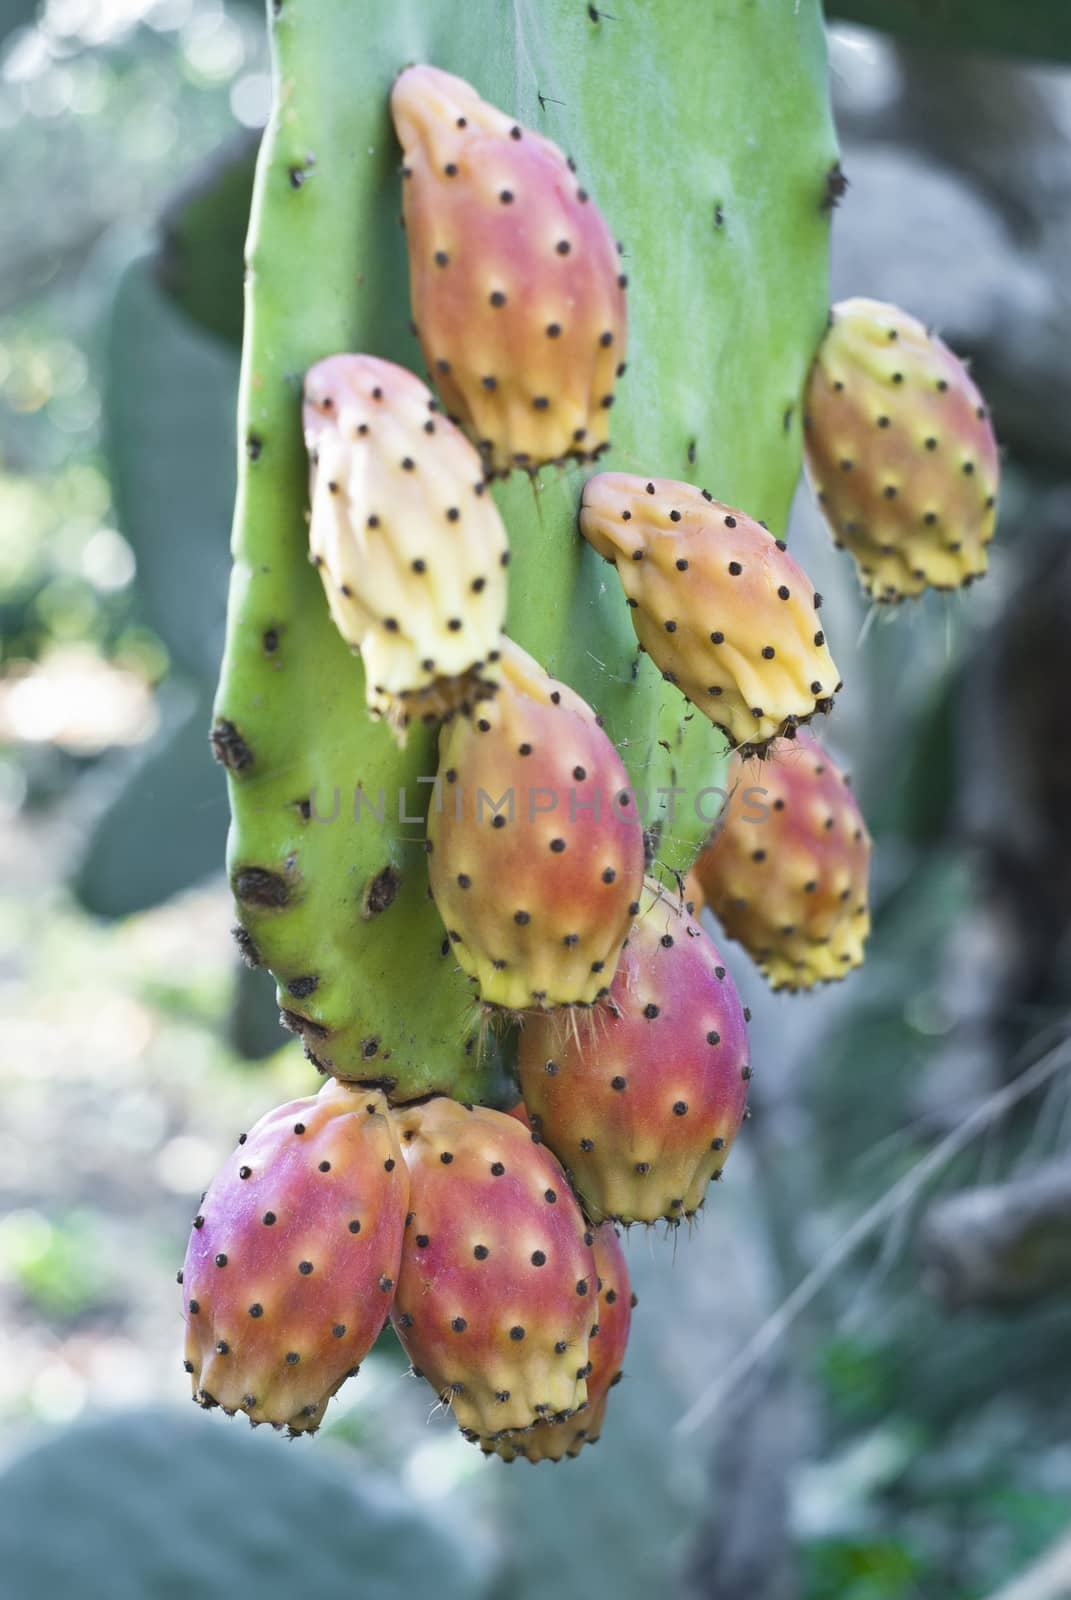 Cactus fruit, prickly pears in sicilian country